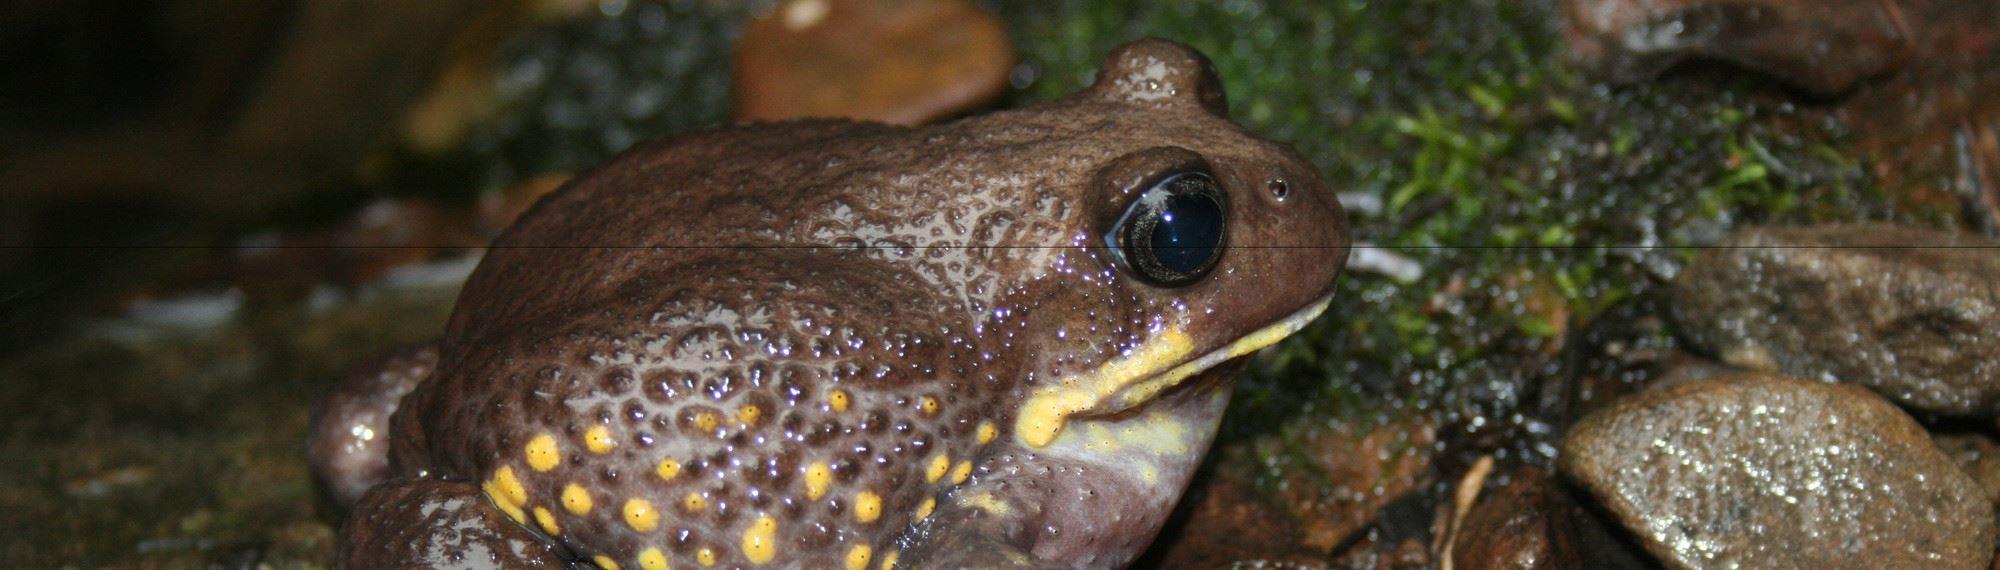 Giant Burrowing Frog on wet rocks side view. The frog is dark brown with yellow lips and spots on its side.